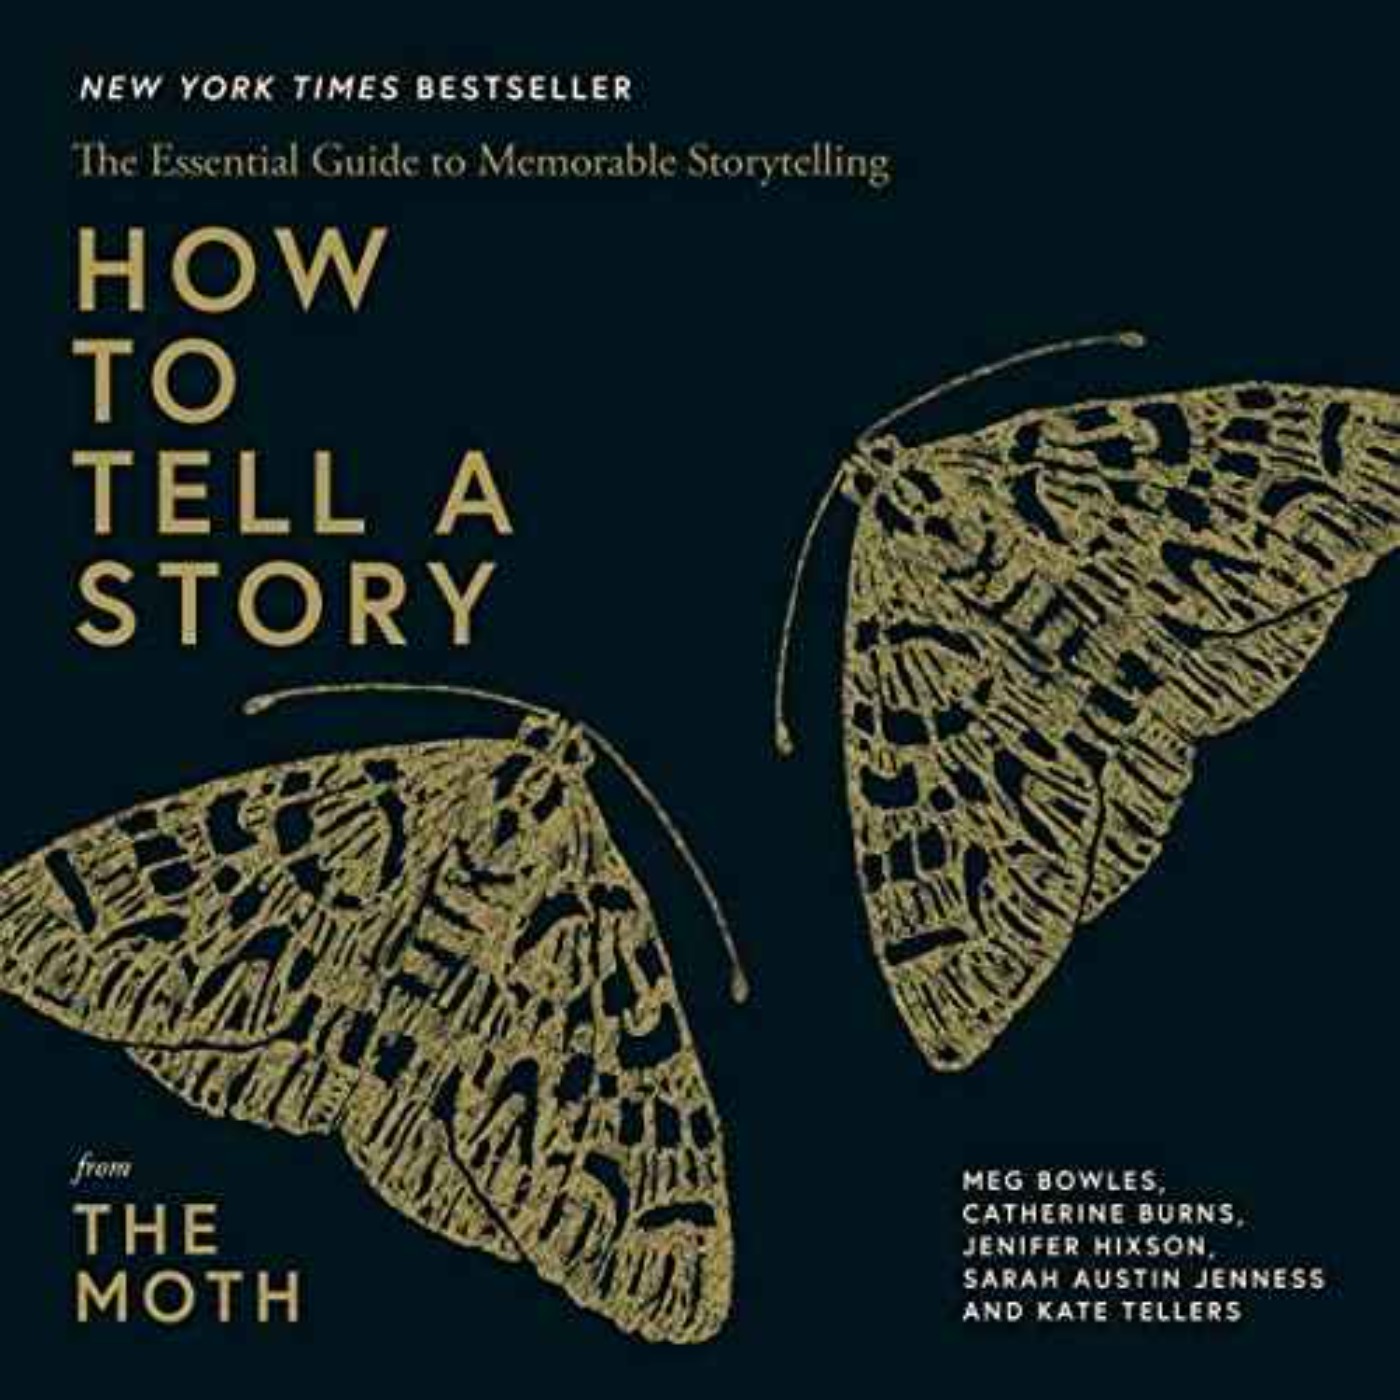 We’ve never needed stories more - a masterclass by a story coach from The Moth